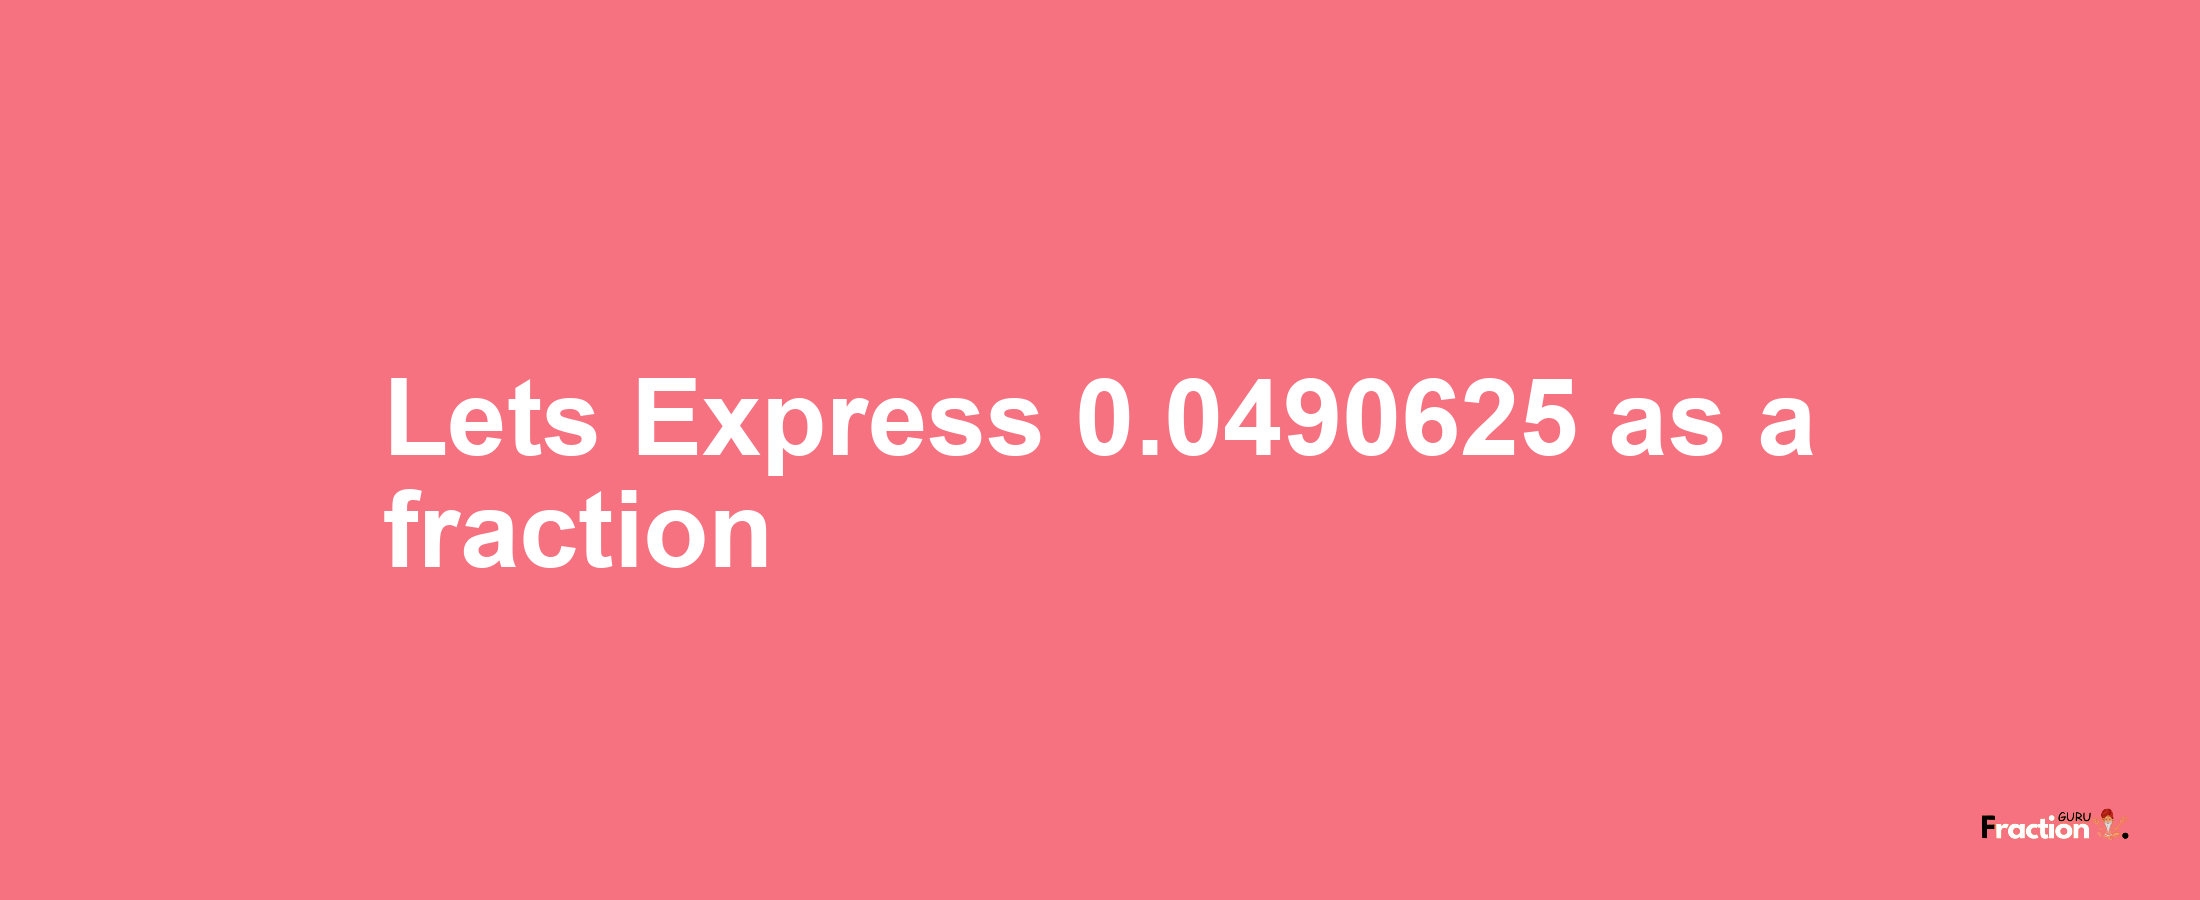 Lets Express 0.0490625 as afraction